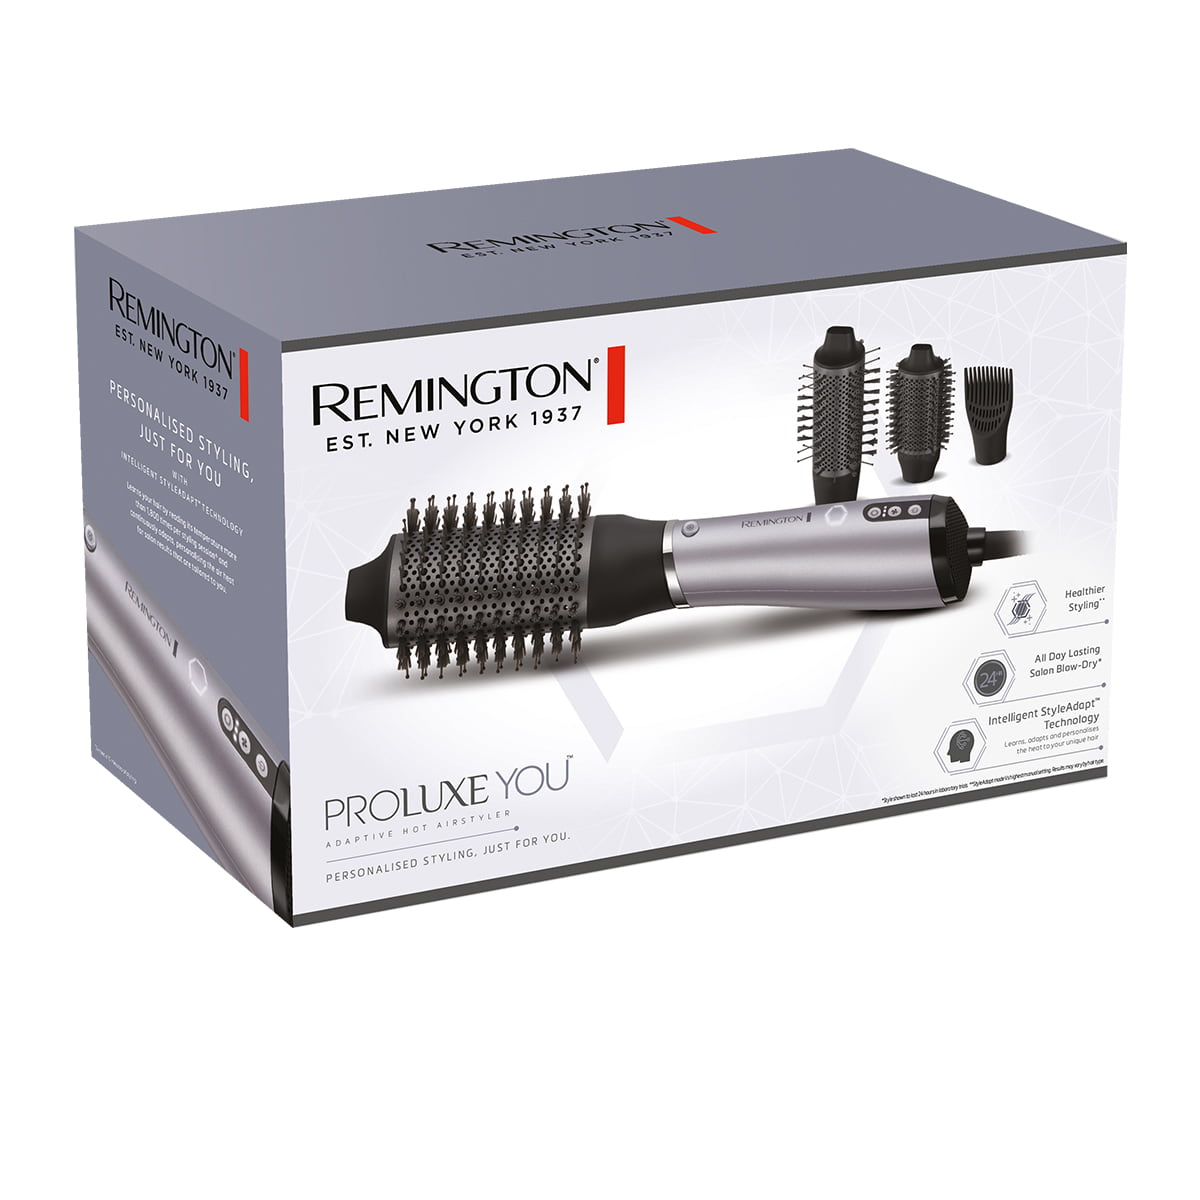 Remington Proluxe You hair dryer review: AI haircare, personalised for you